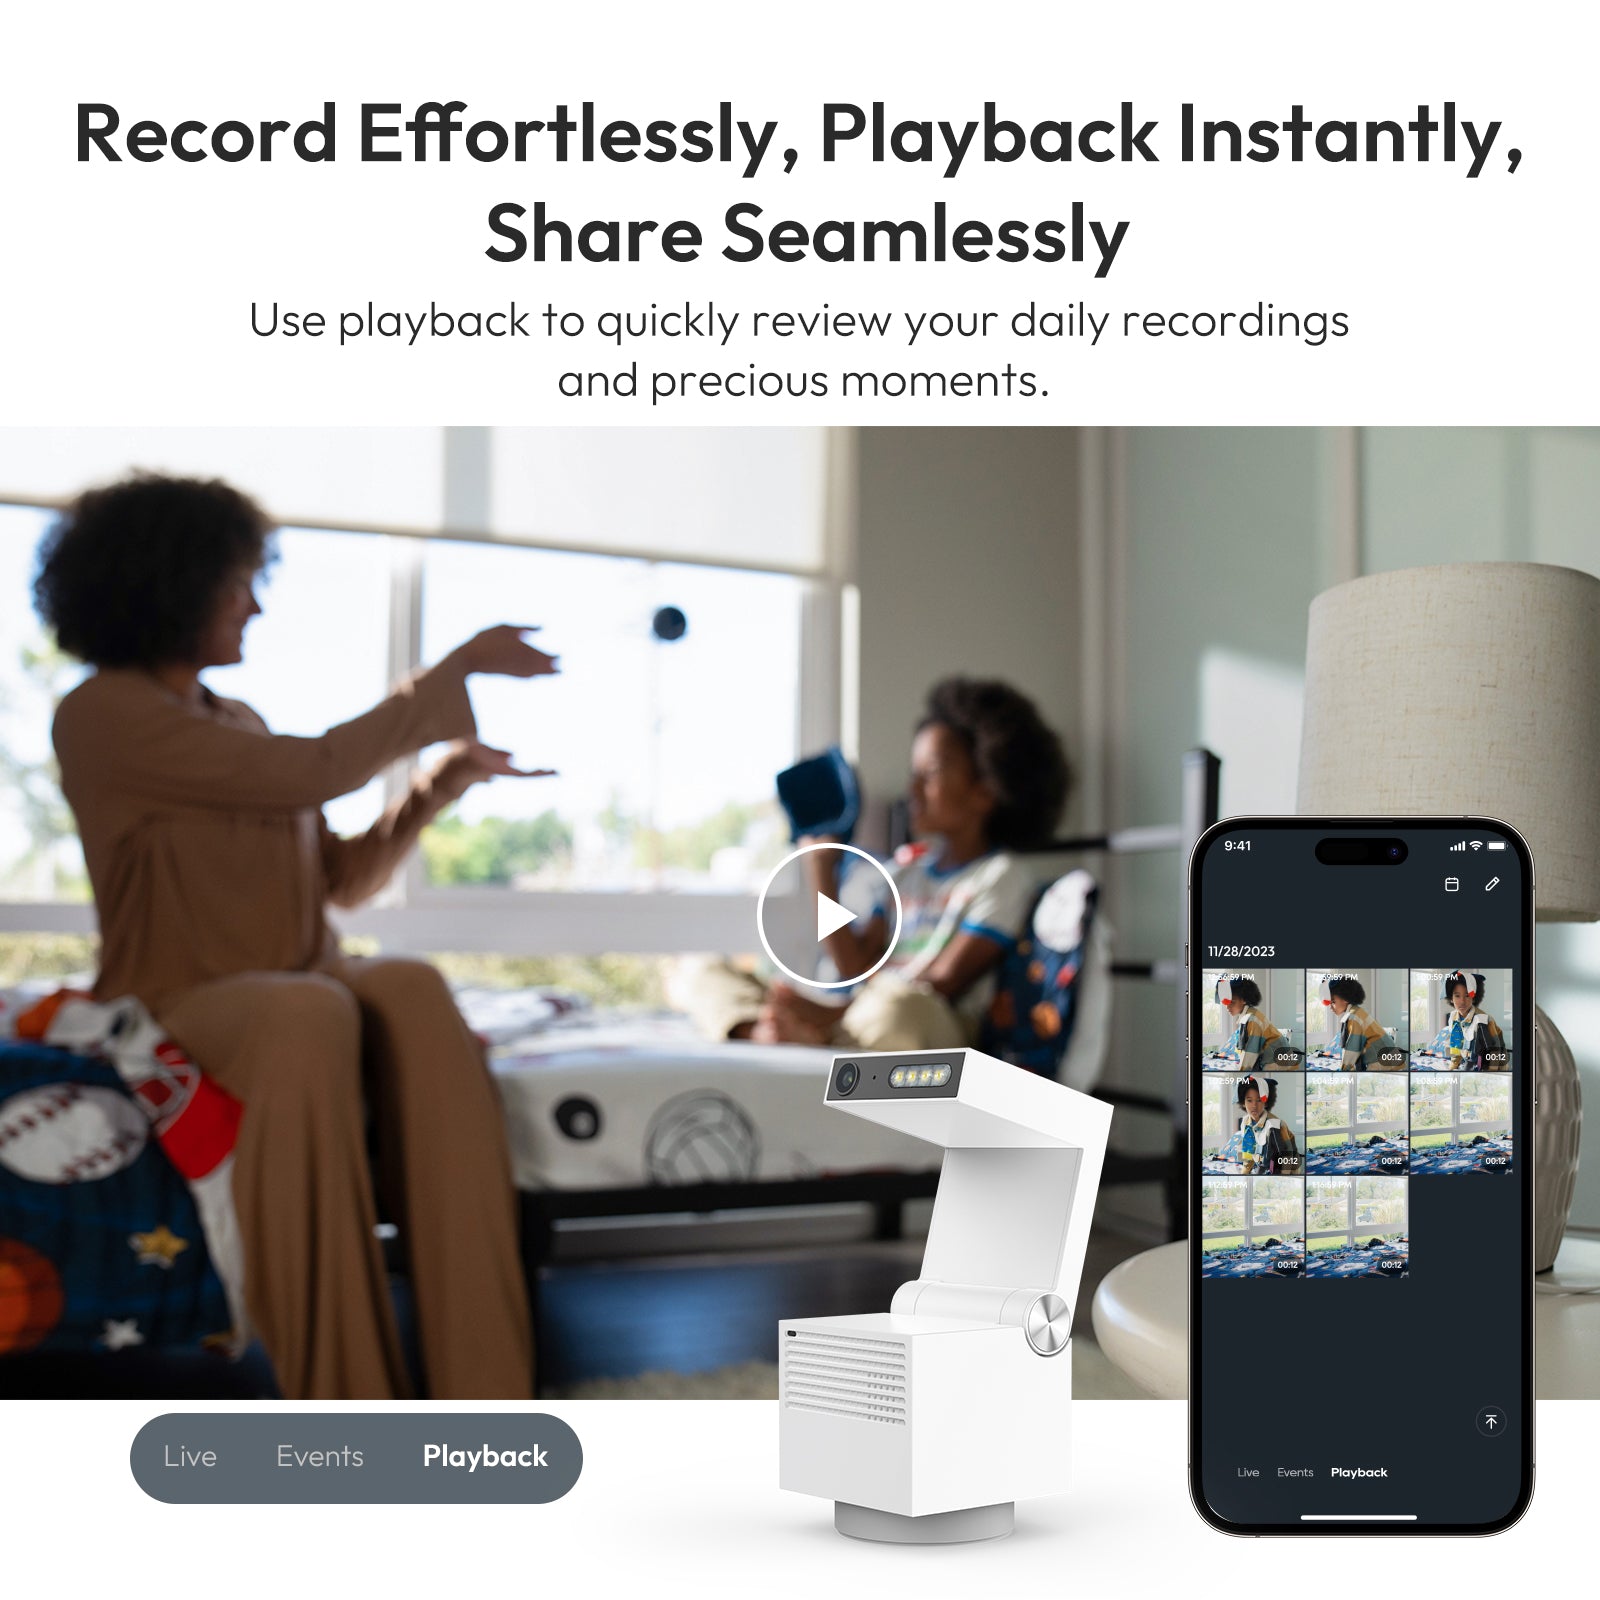 Modern home security promotion showing a woman and child with the Psync Camera Genie S and smartphone app displaying live feed and playback options